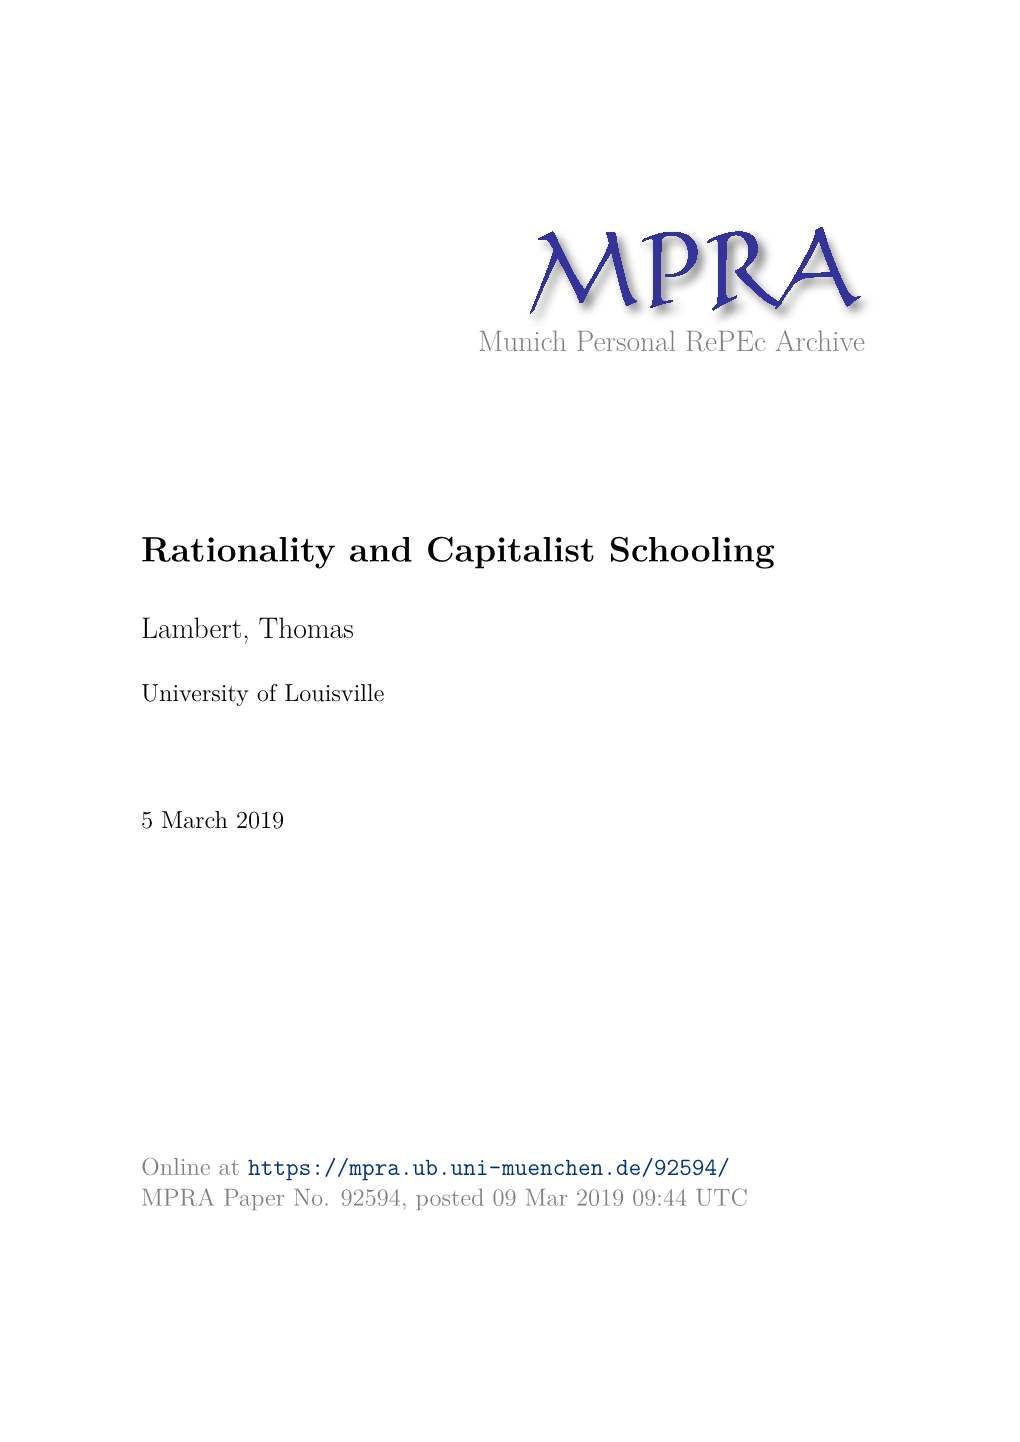 Rationality and Capitalist Schooling